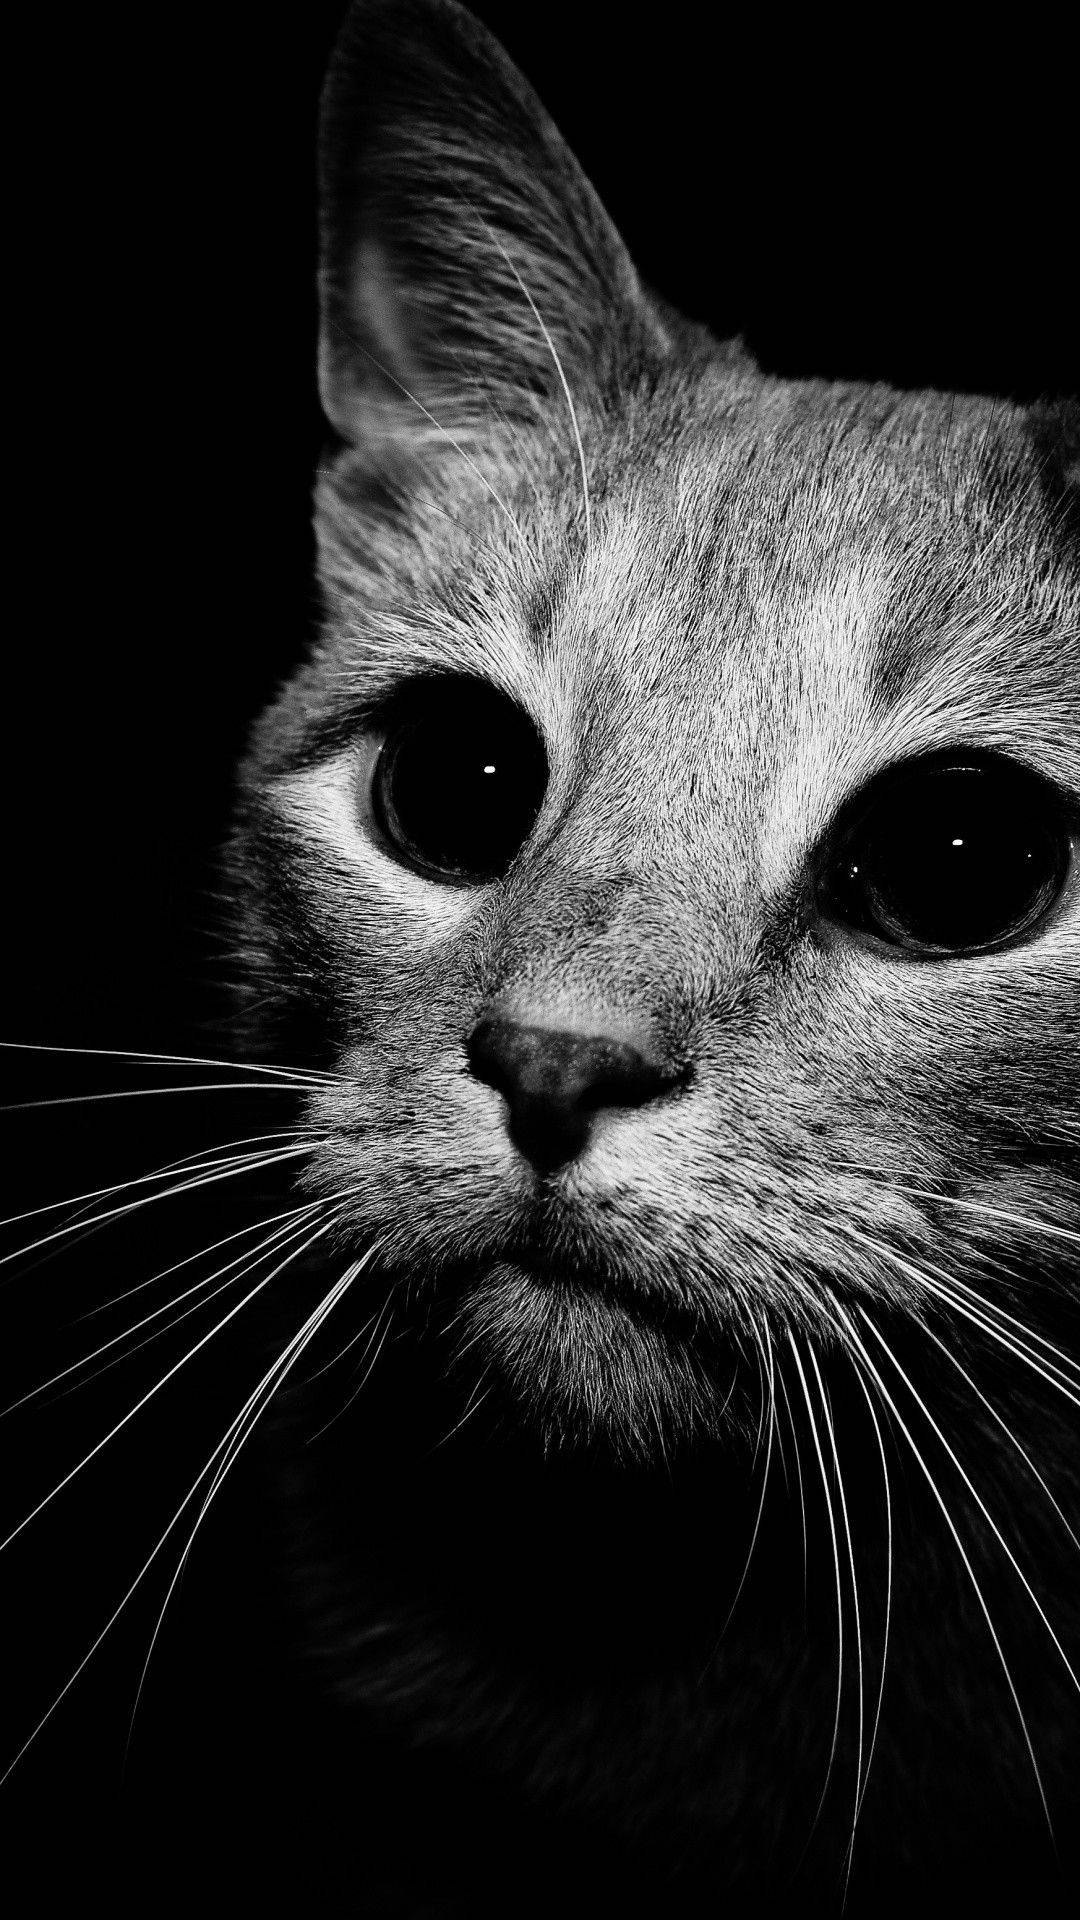 Cute Black And White Cat Close-up Wallpaper